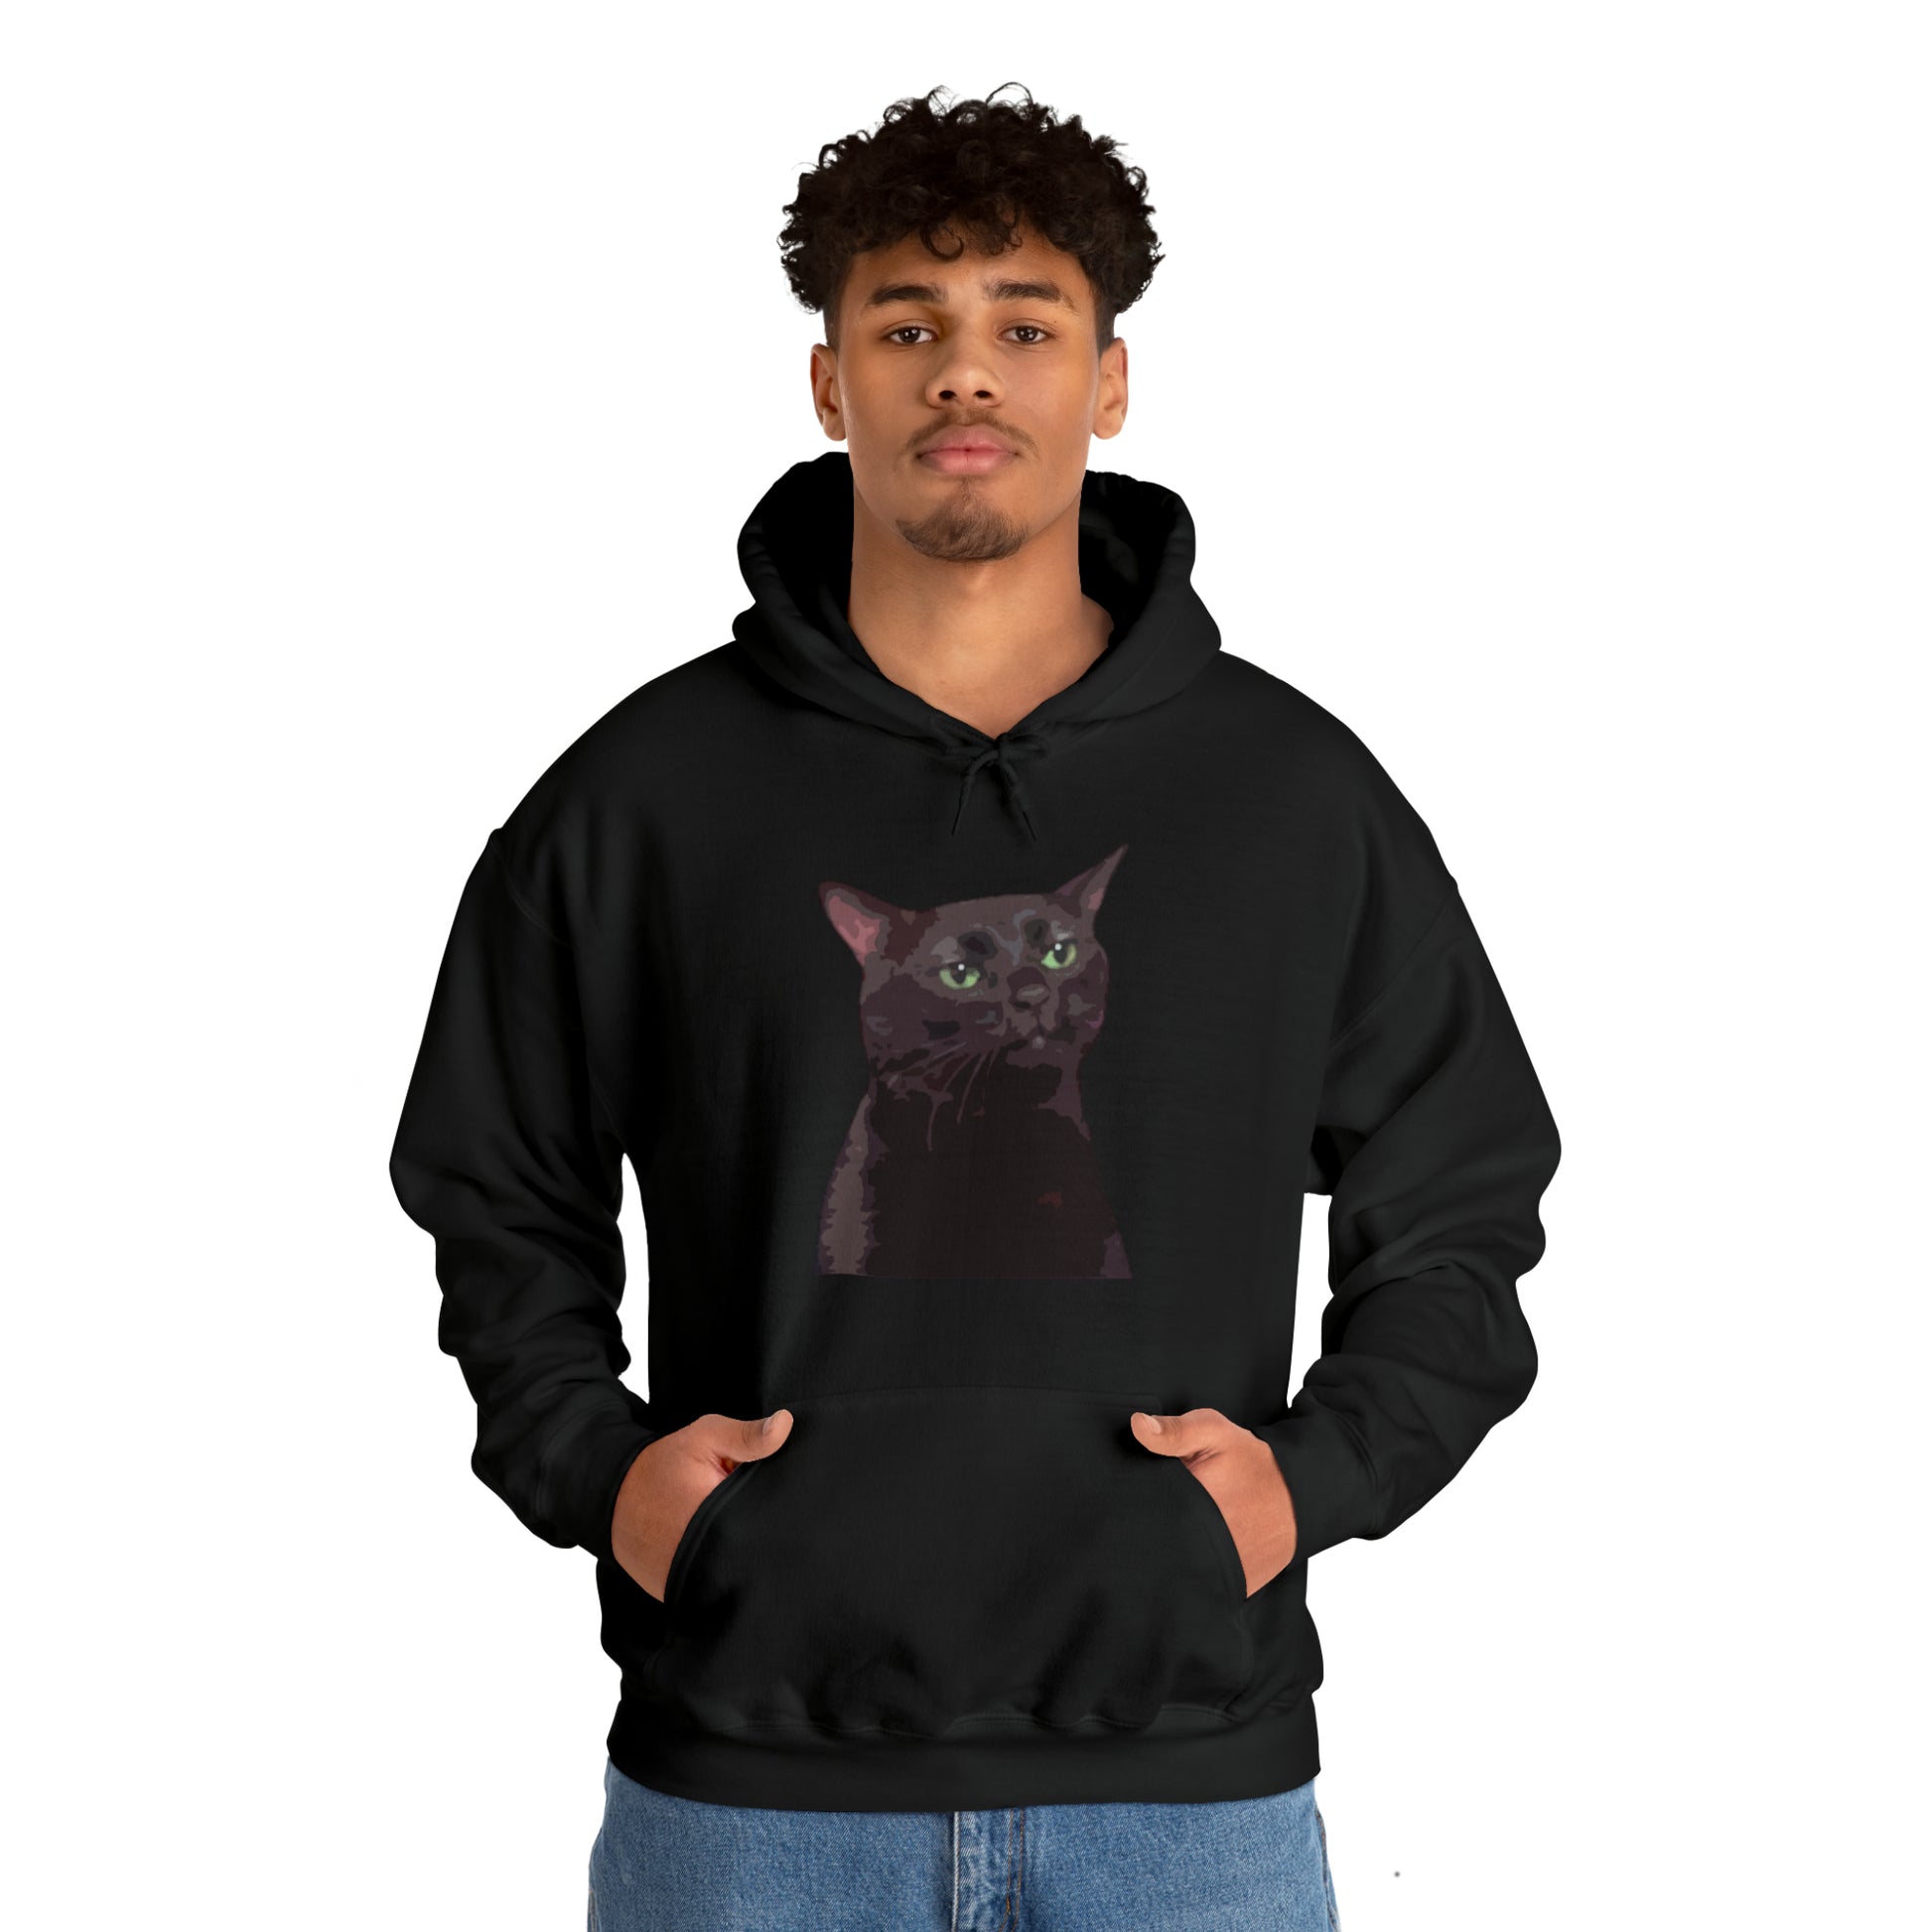   Black Cat Zoning Out Hoodie from HoodySZN.com